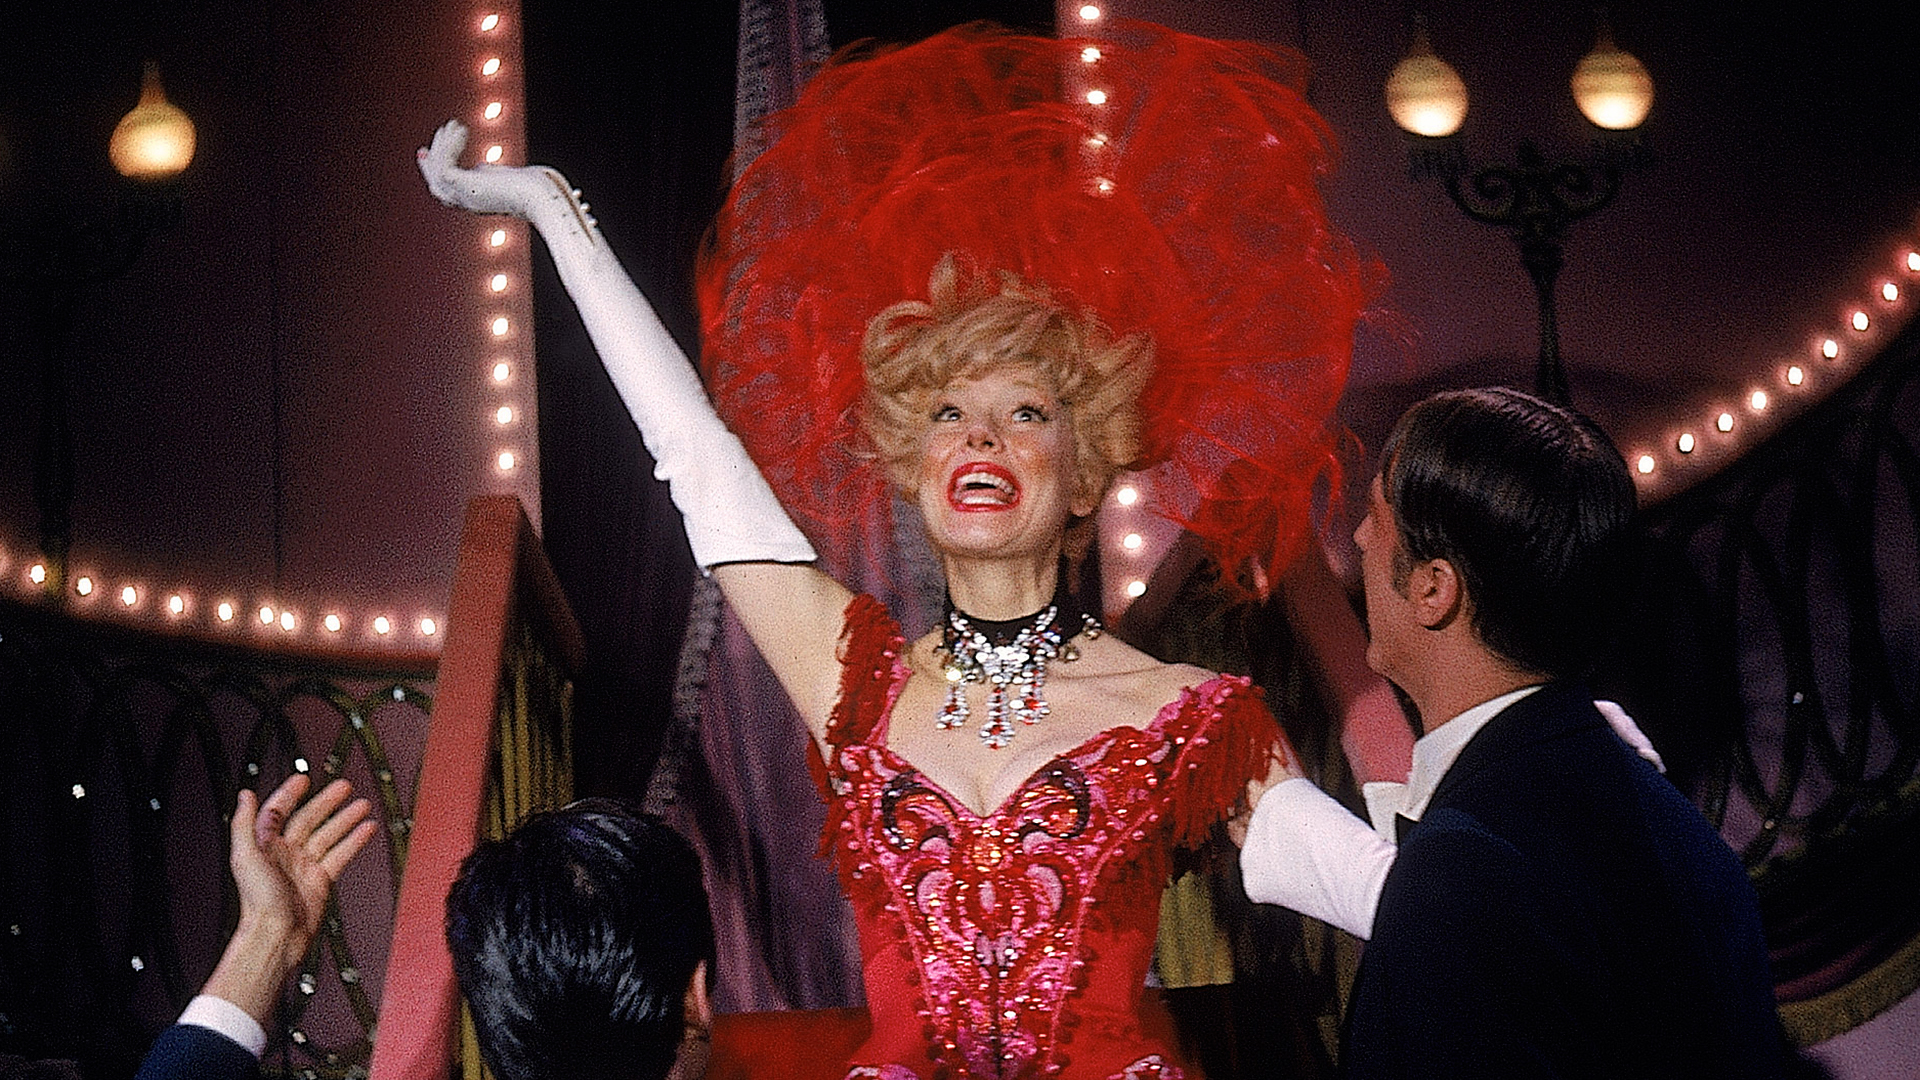 January 16, 1964: “Hello, Dolly!” Starring Carol Channing Opened on Broadway and Went on to Win 10 Tony Awards